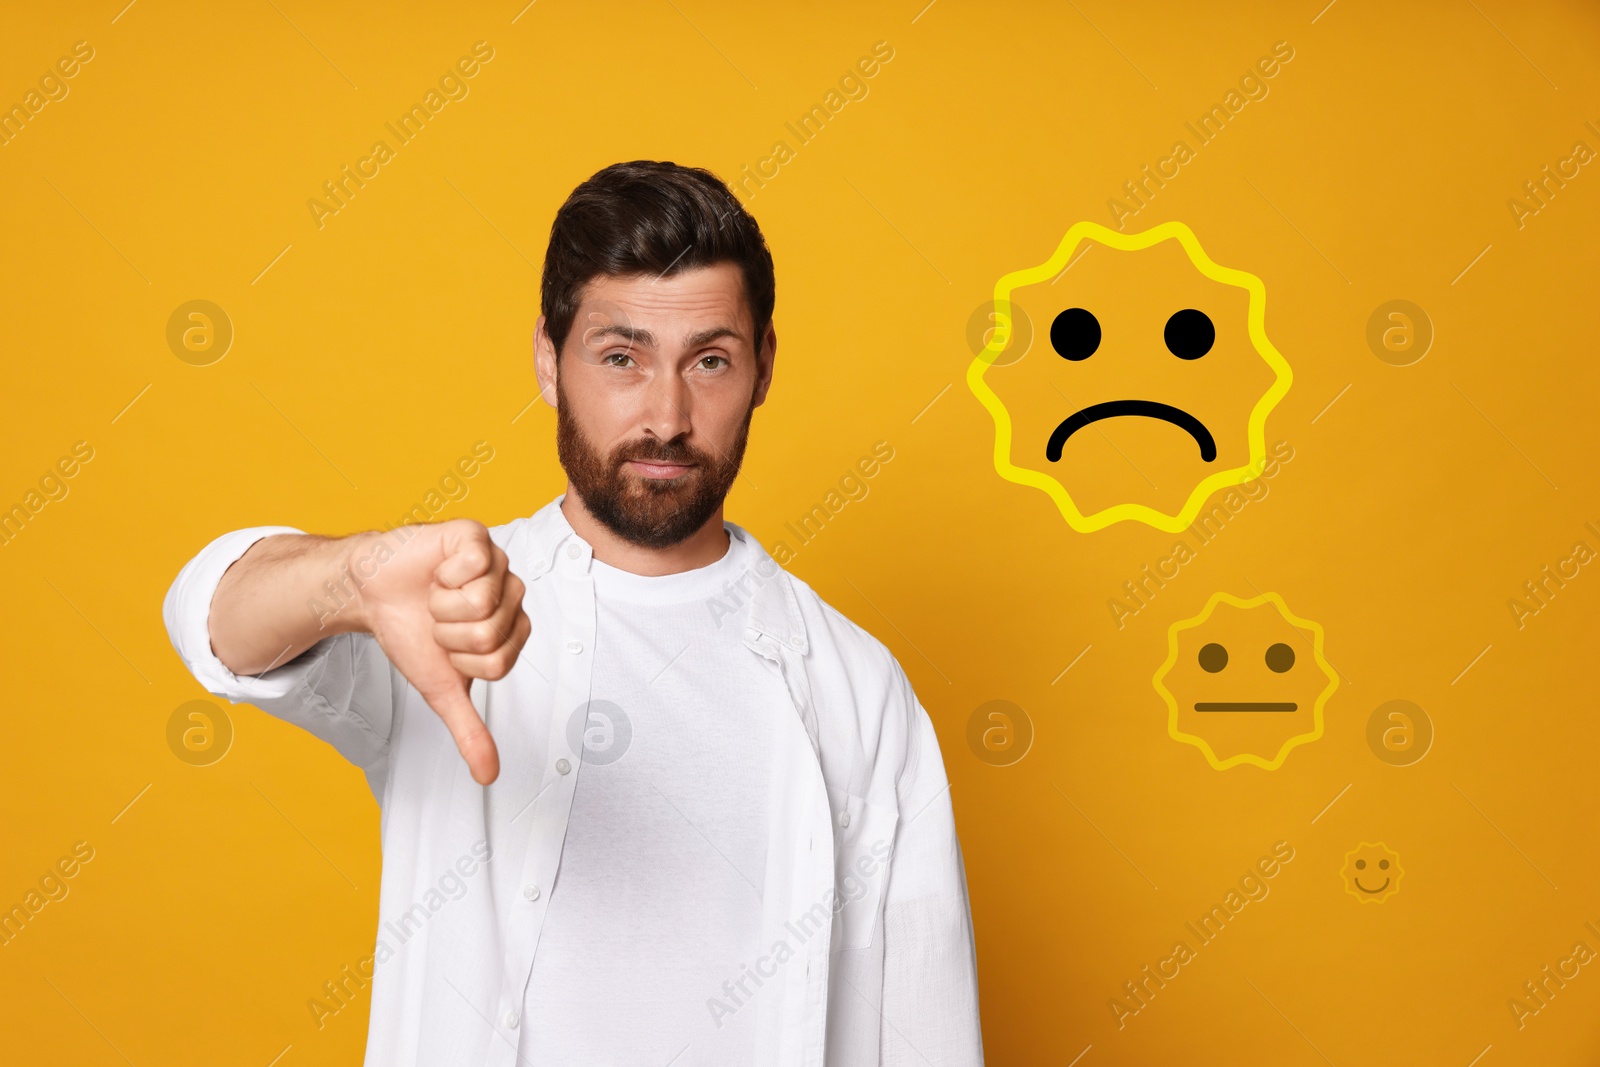 Image of Complaint. Dissatisfied man showing thumbs-down on orange background. Illustrations of sad and neutral faces near him